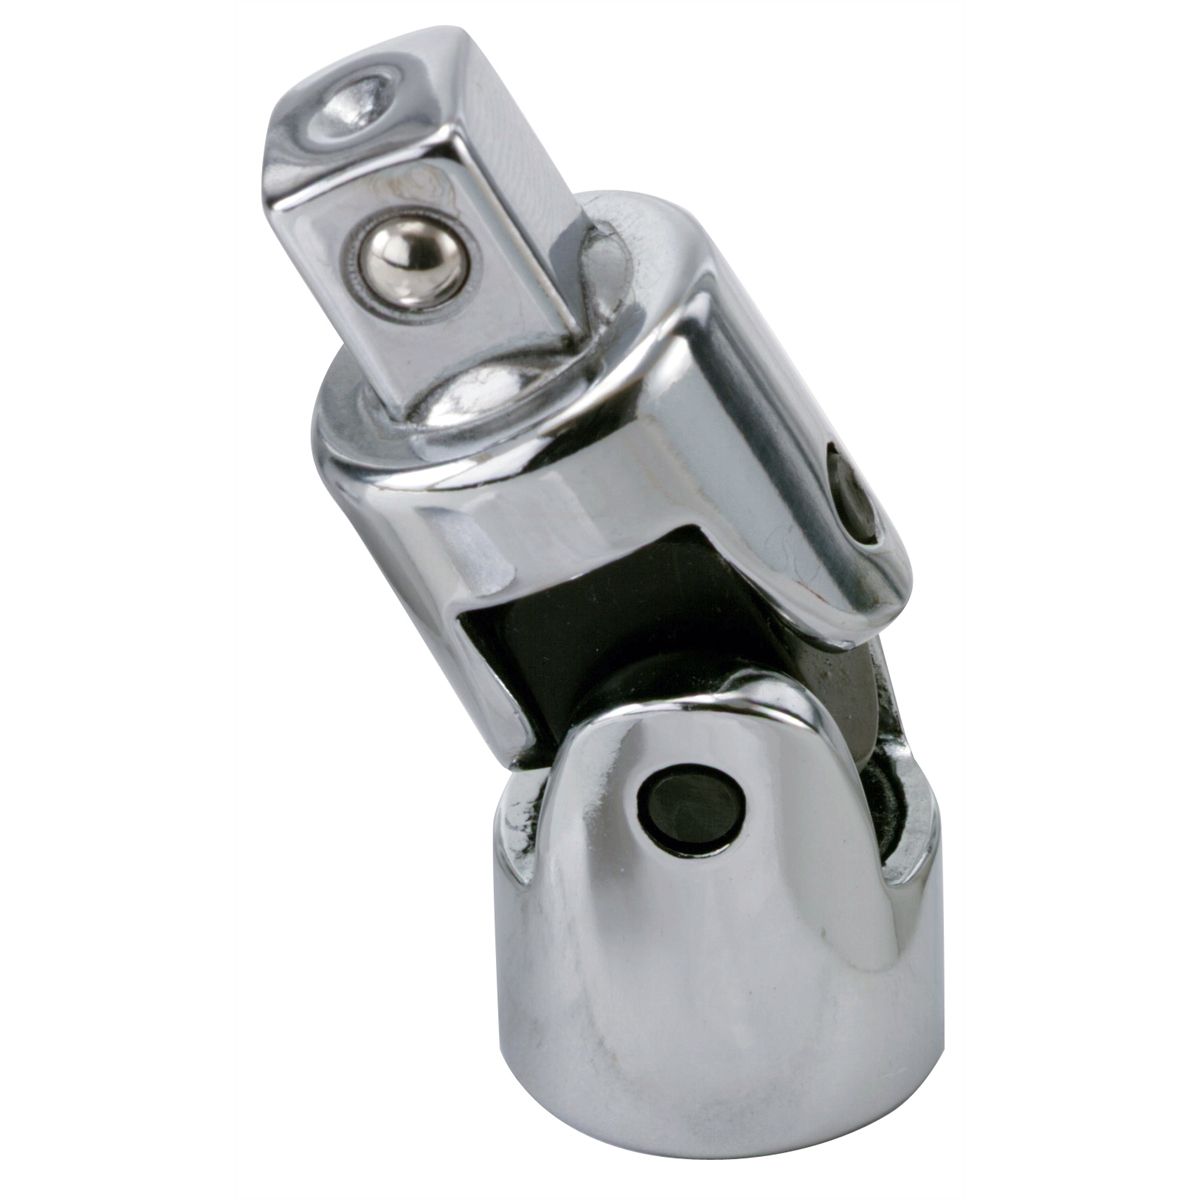 1/4" Drive Universal Joint